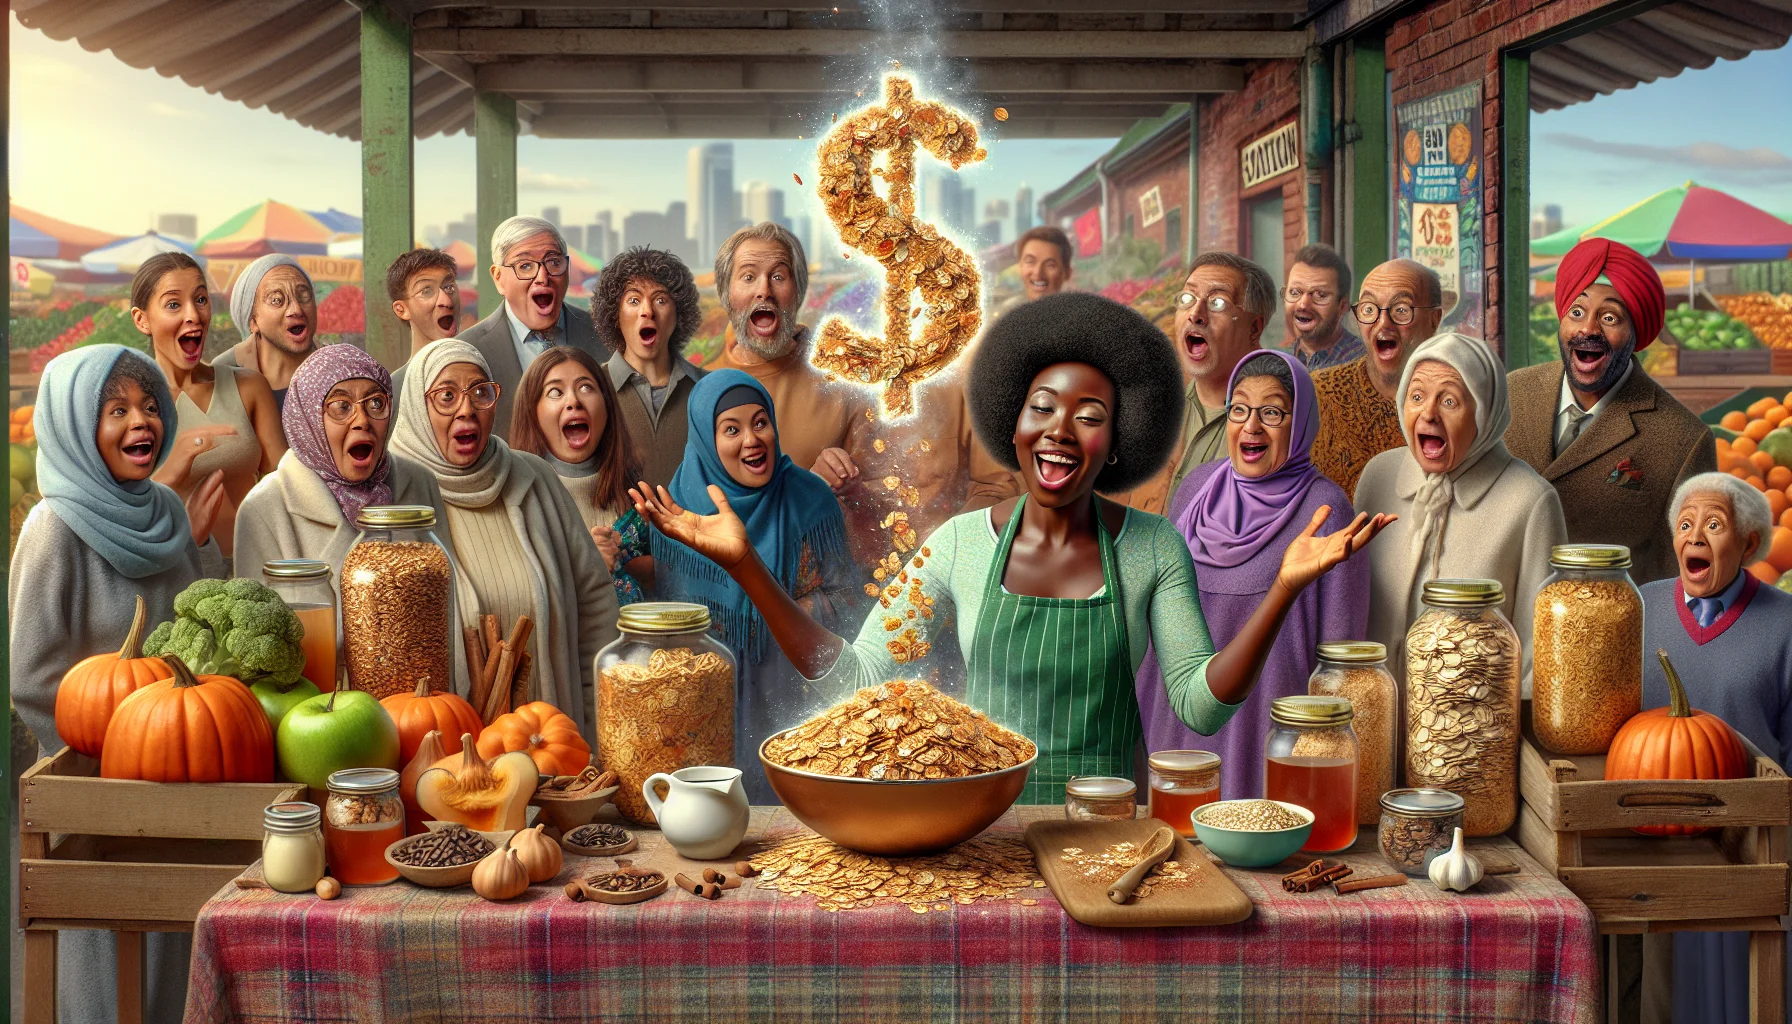 Create a humorous yet realistic scene set in a bustling, bargain-friendly fruit and vegetable market. In the center stands a makeshift stand, surrounded by people of diverse genders and descents expressing surprise and delight. There is a Black woman enthusiastically showcasing the magic of pumpkin spice granola creation. She holds up a bowl full of the crunchy golden morsels, a fragrant cloud of steam wafting from it up to reveal holographic dollar signs in the air, symbolizing healthful eating for less money. Ingredients like oats, pumpkin seeds, honey, and aromatic spices are visible around her, adding to the scene. 